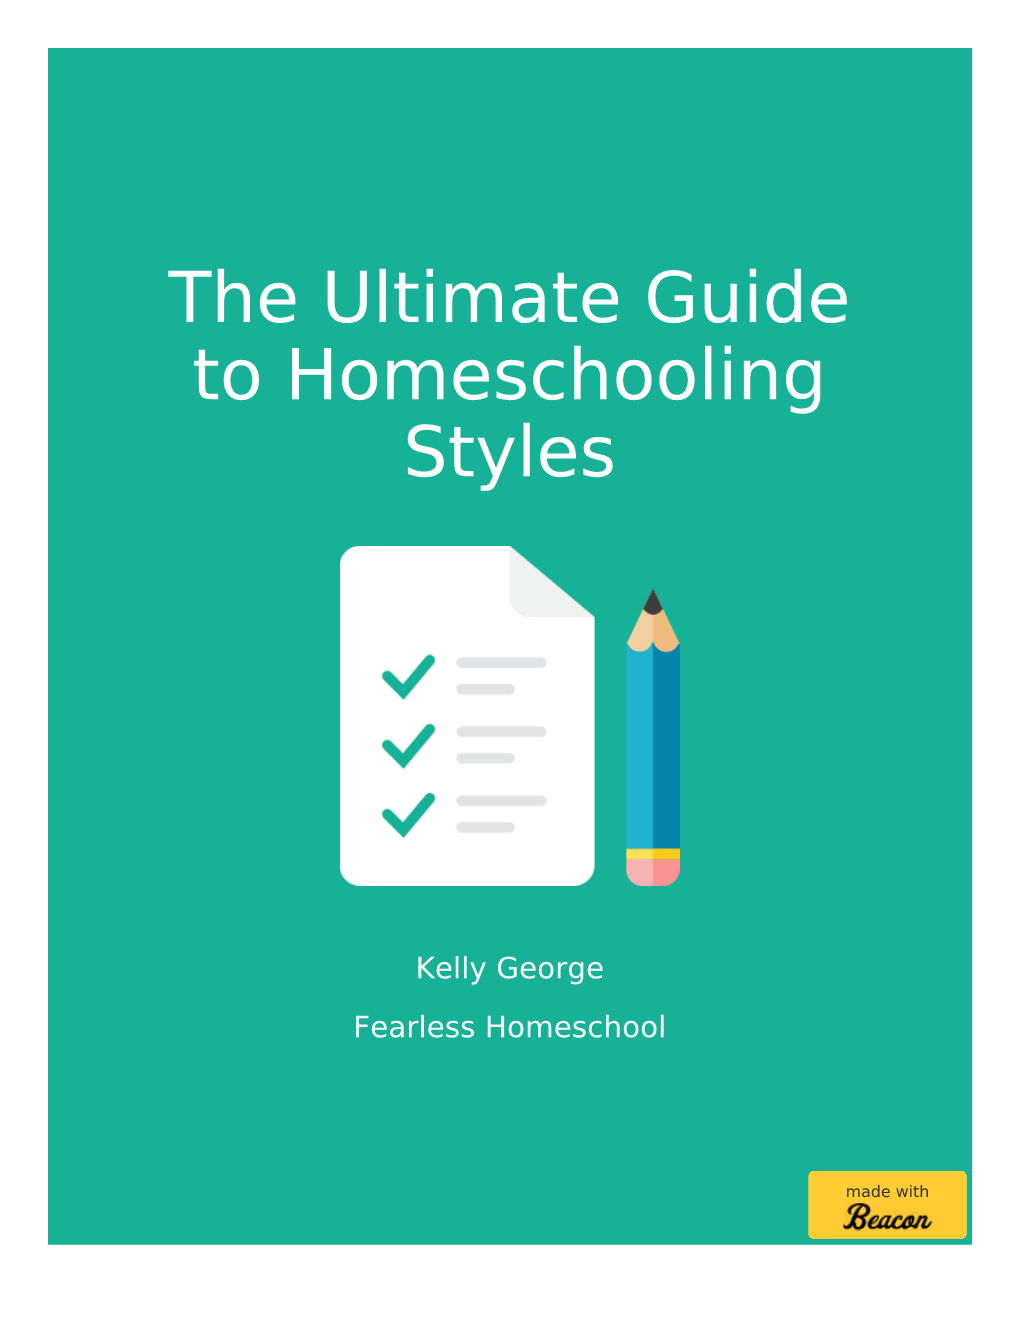 The Ultimate Guide to Homeschooling Styles